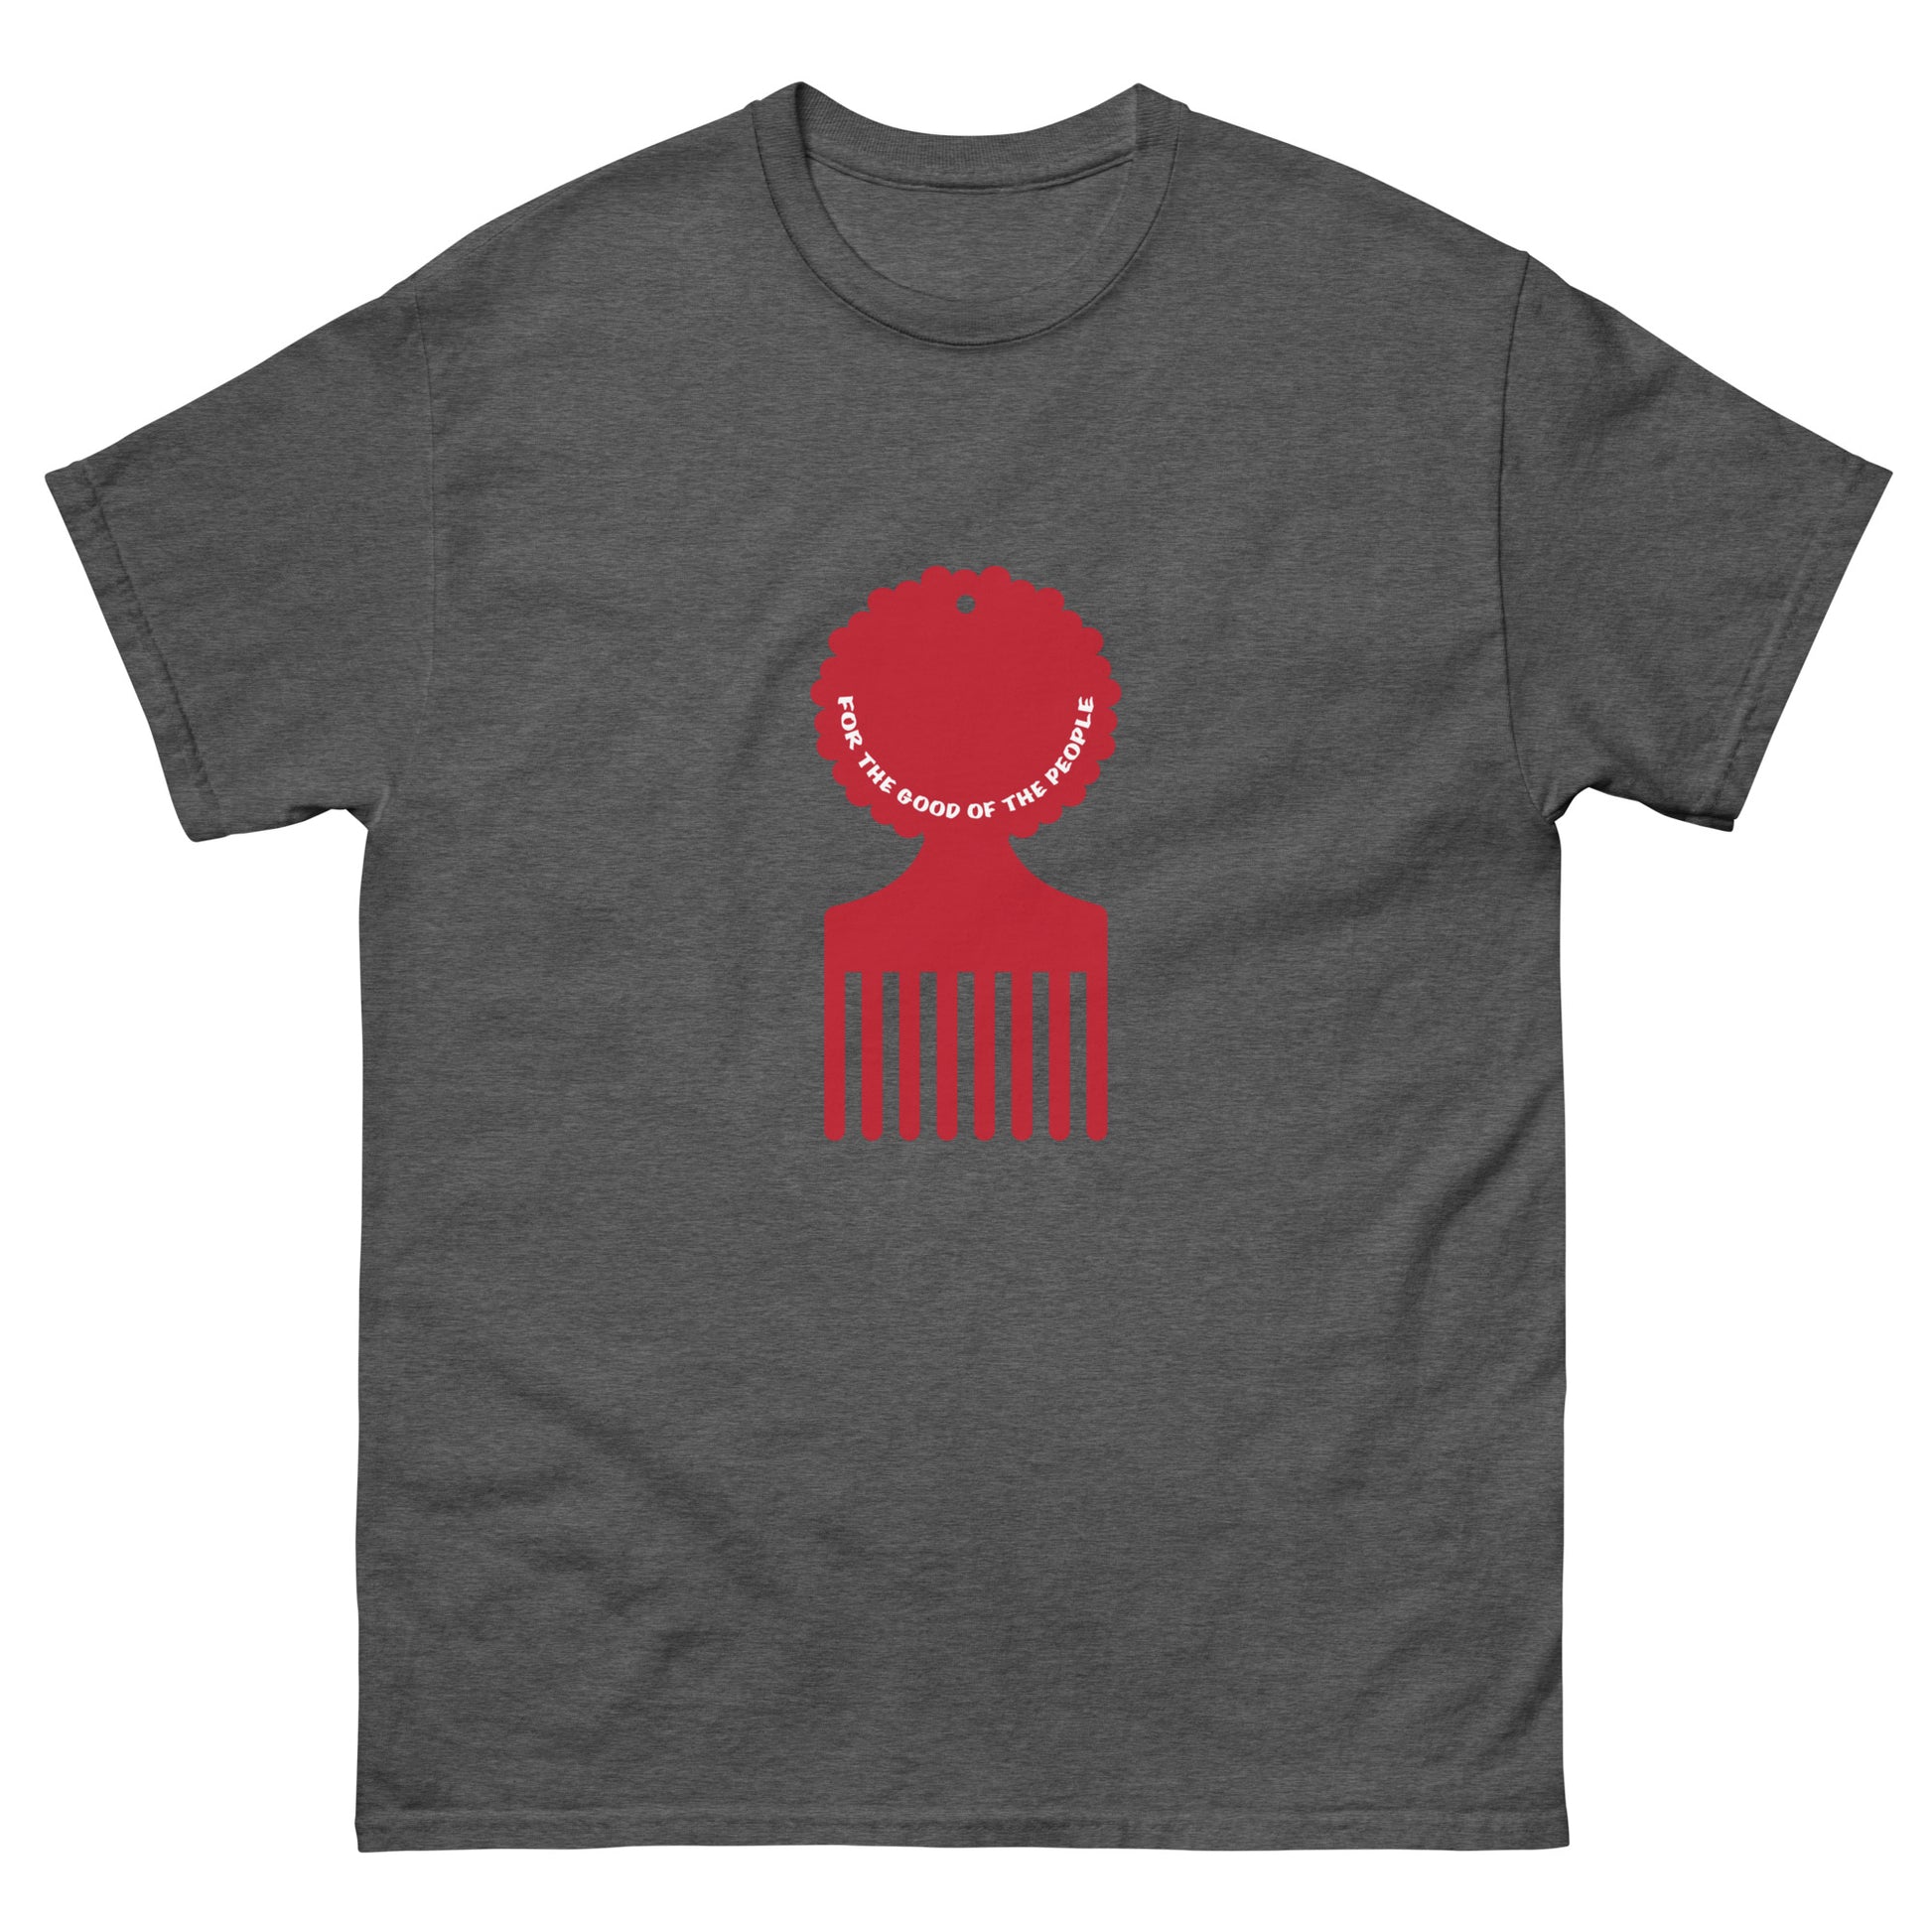 Men's dark heather gray tee with red afro pick in the center of shirt, with for the good of the people in white inside the afro pick's handle.